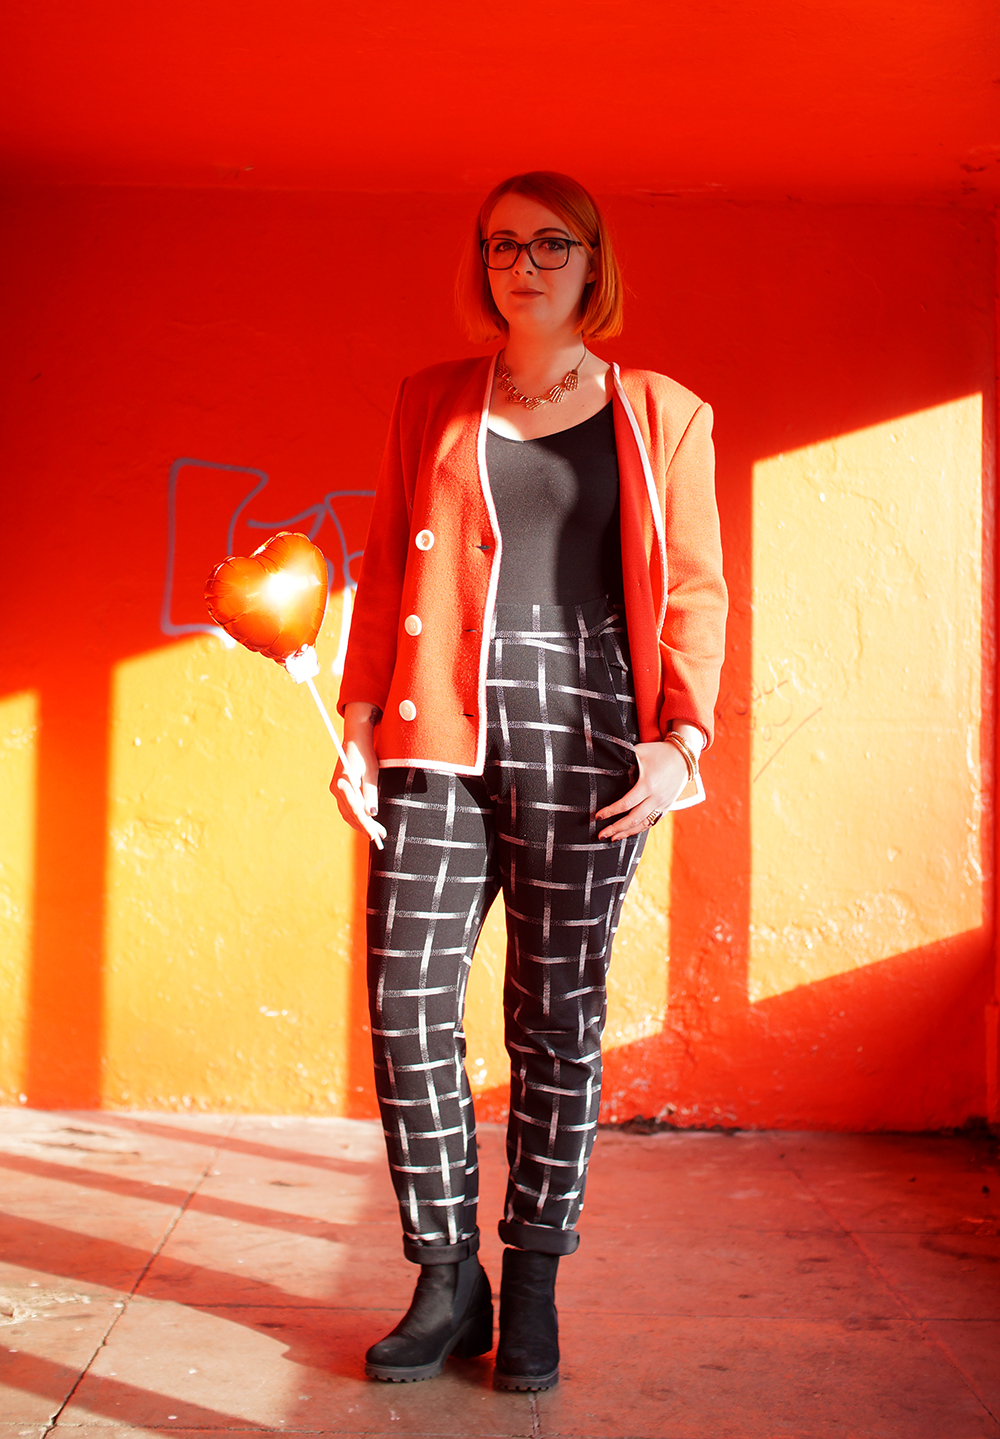 Frankly Ms Shankly, Edinburgh Blogger, red head, charity shop, H &M, New Look, Primark, vintage cardigan, Galentine's Day, red heart balloon, Valentine's style, Galentine's style